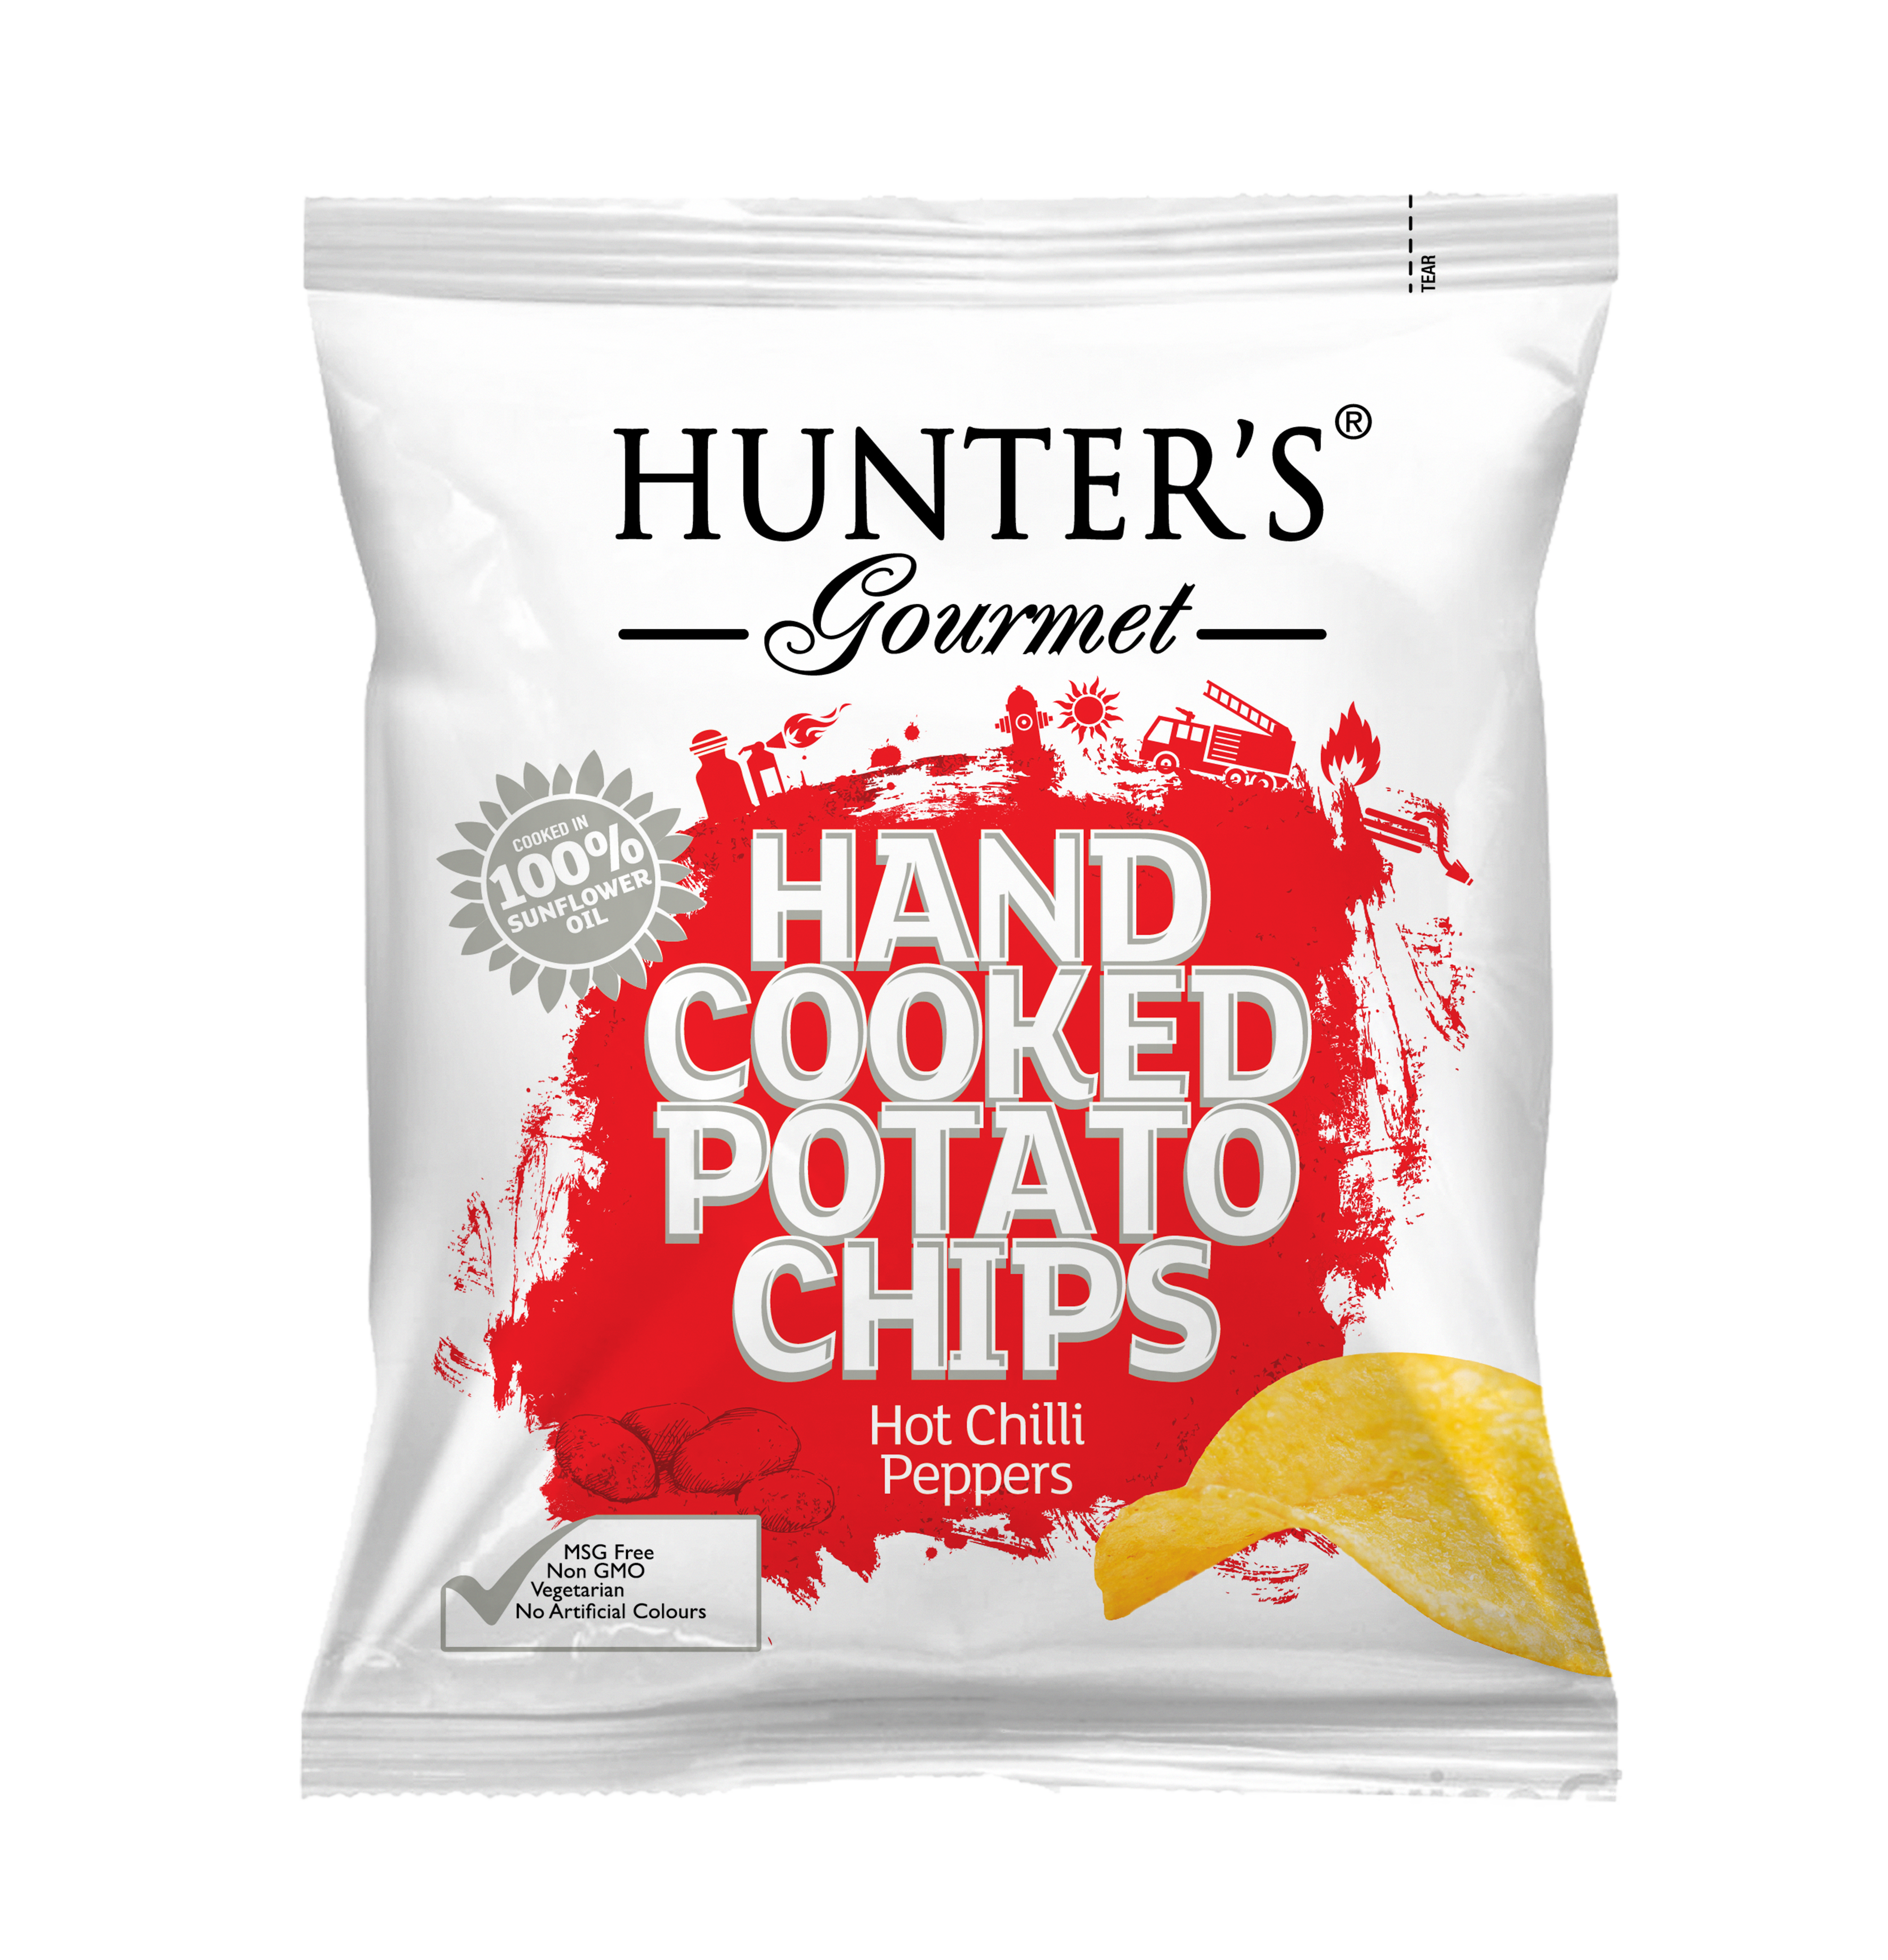 Hunter's Gourmet Hand Cooked Potato Chips Hot Chilli Peppers 24 units per case 40 g